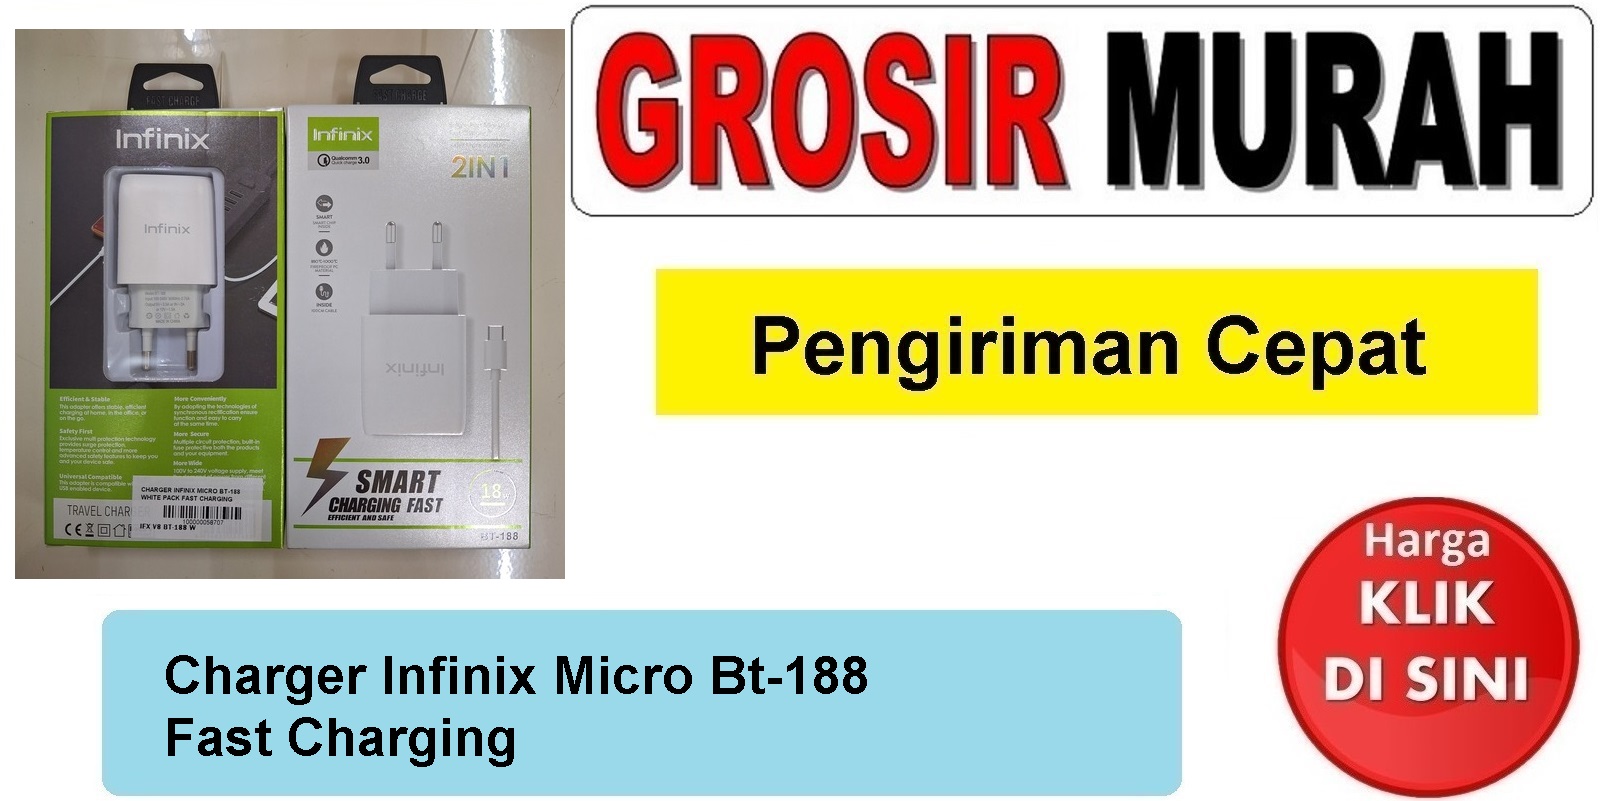 Charger Infinix Micro Bt-188 Fast Charging